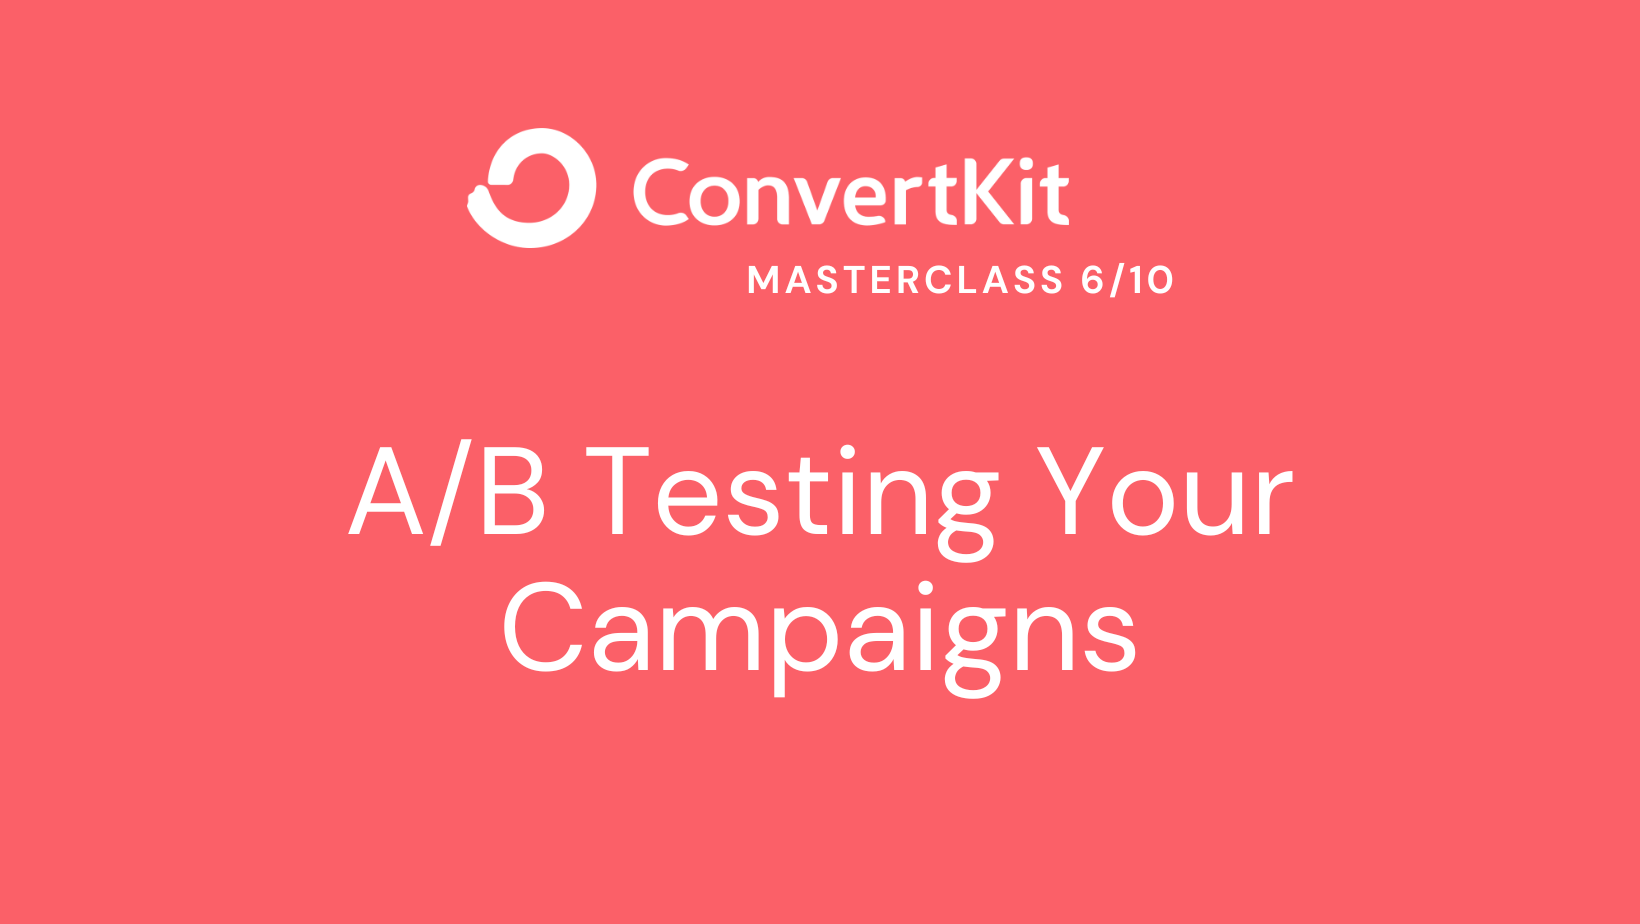 A/B Testing Your Convertkit Campaigns: What You Need to Know